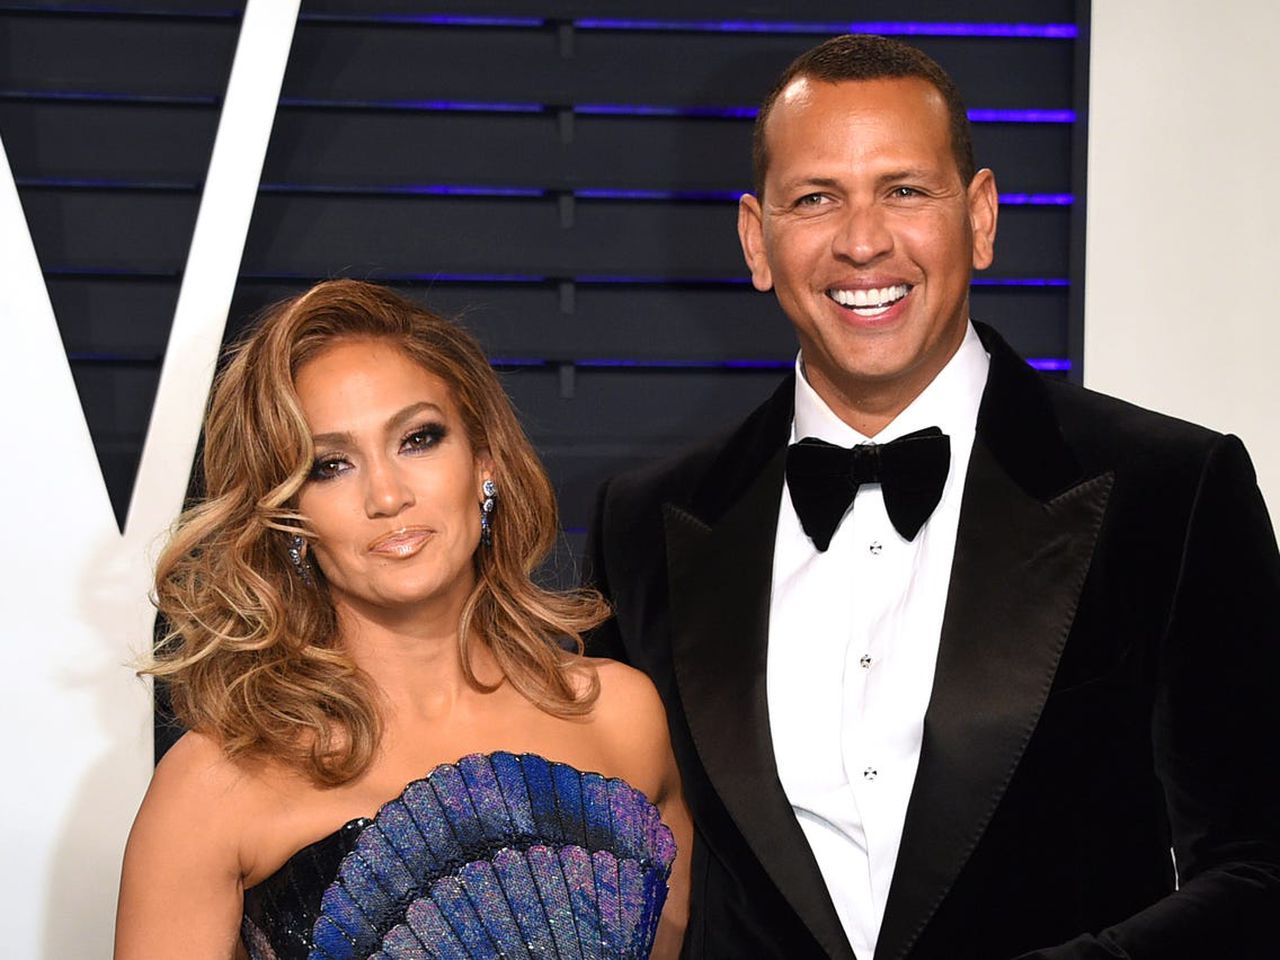 Alex Rodriguez and his fiancee Jennifer Lopez planning to buy